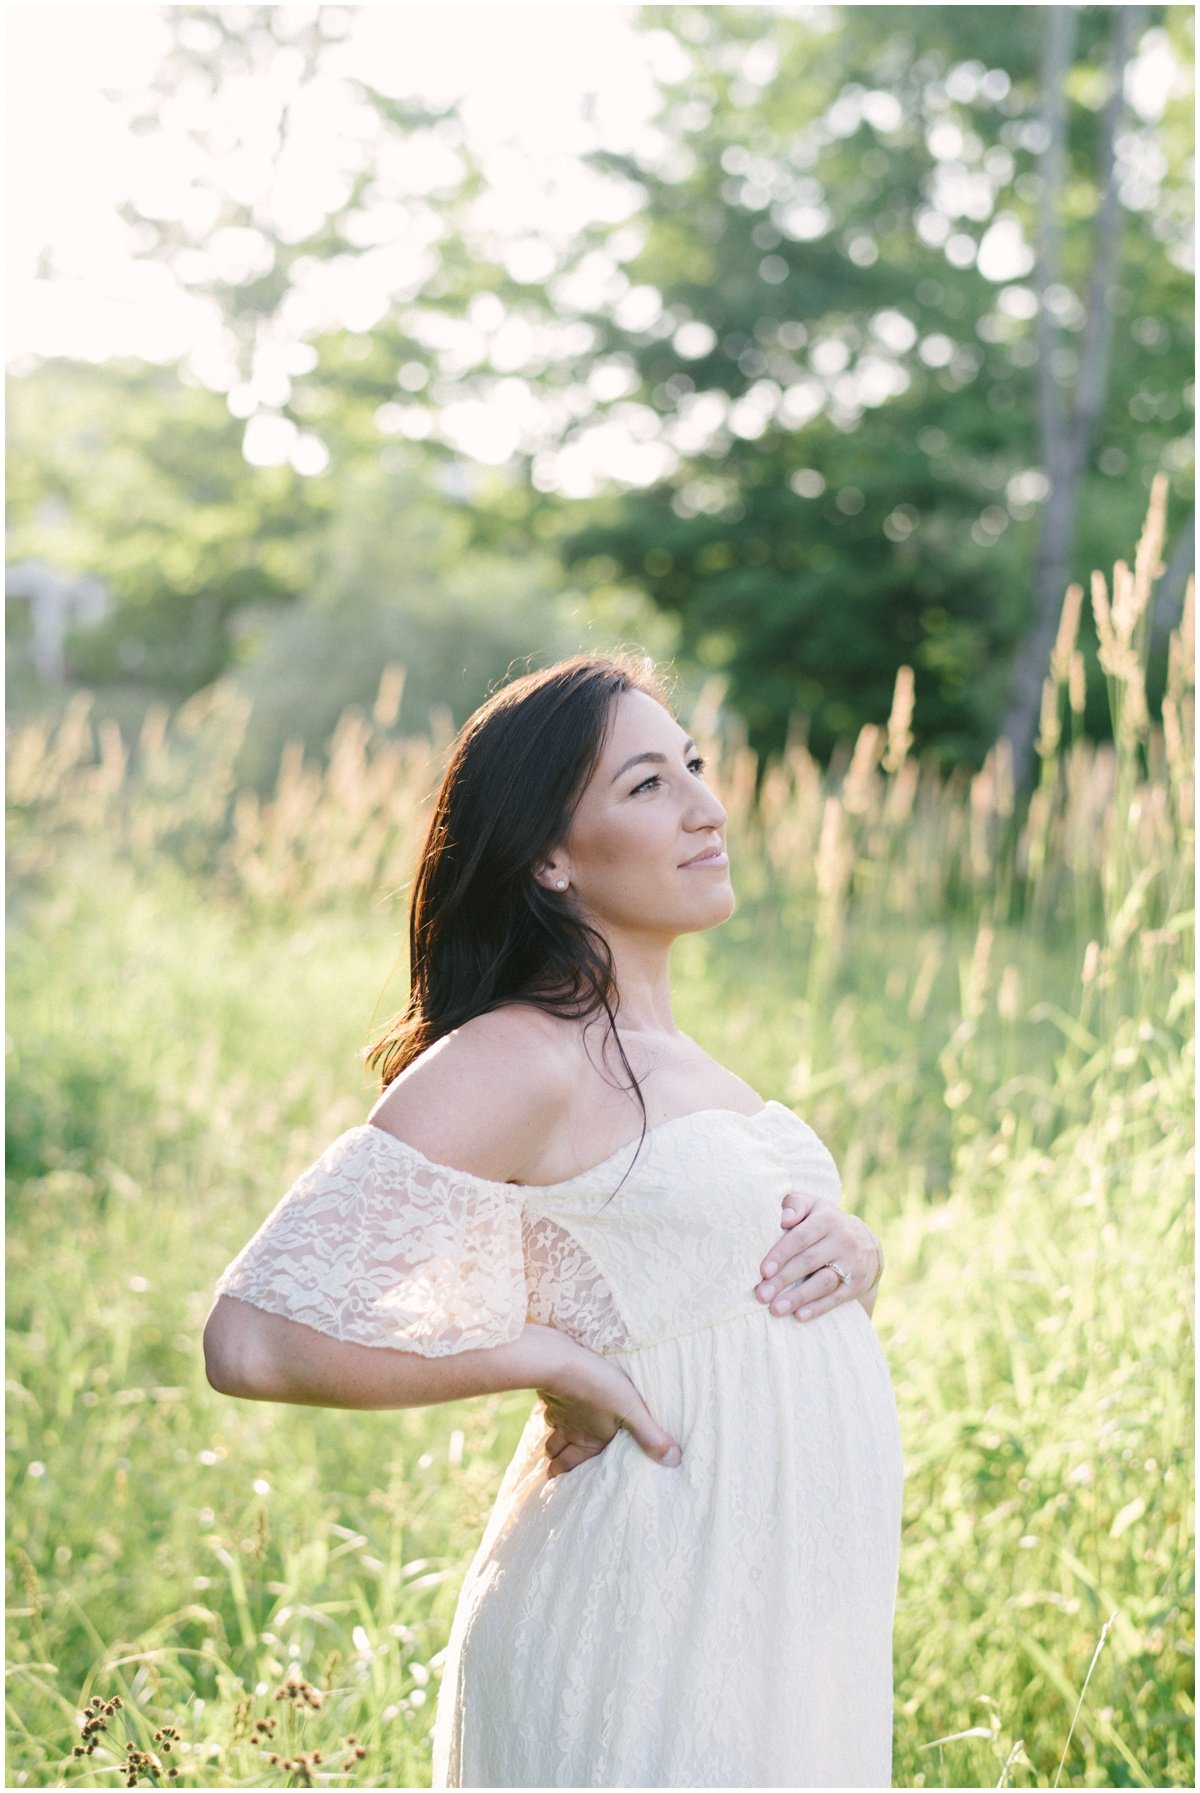 Woman standing in grassy field looking off into the distance while cradling baby bump during maternity session | NKB Photo